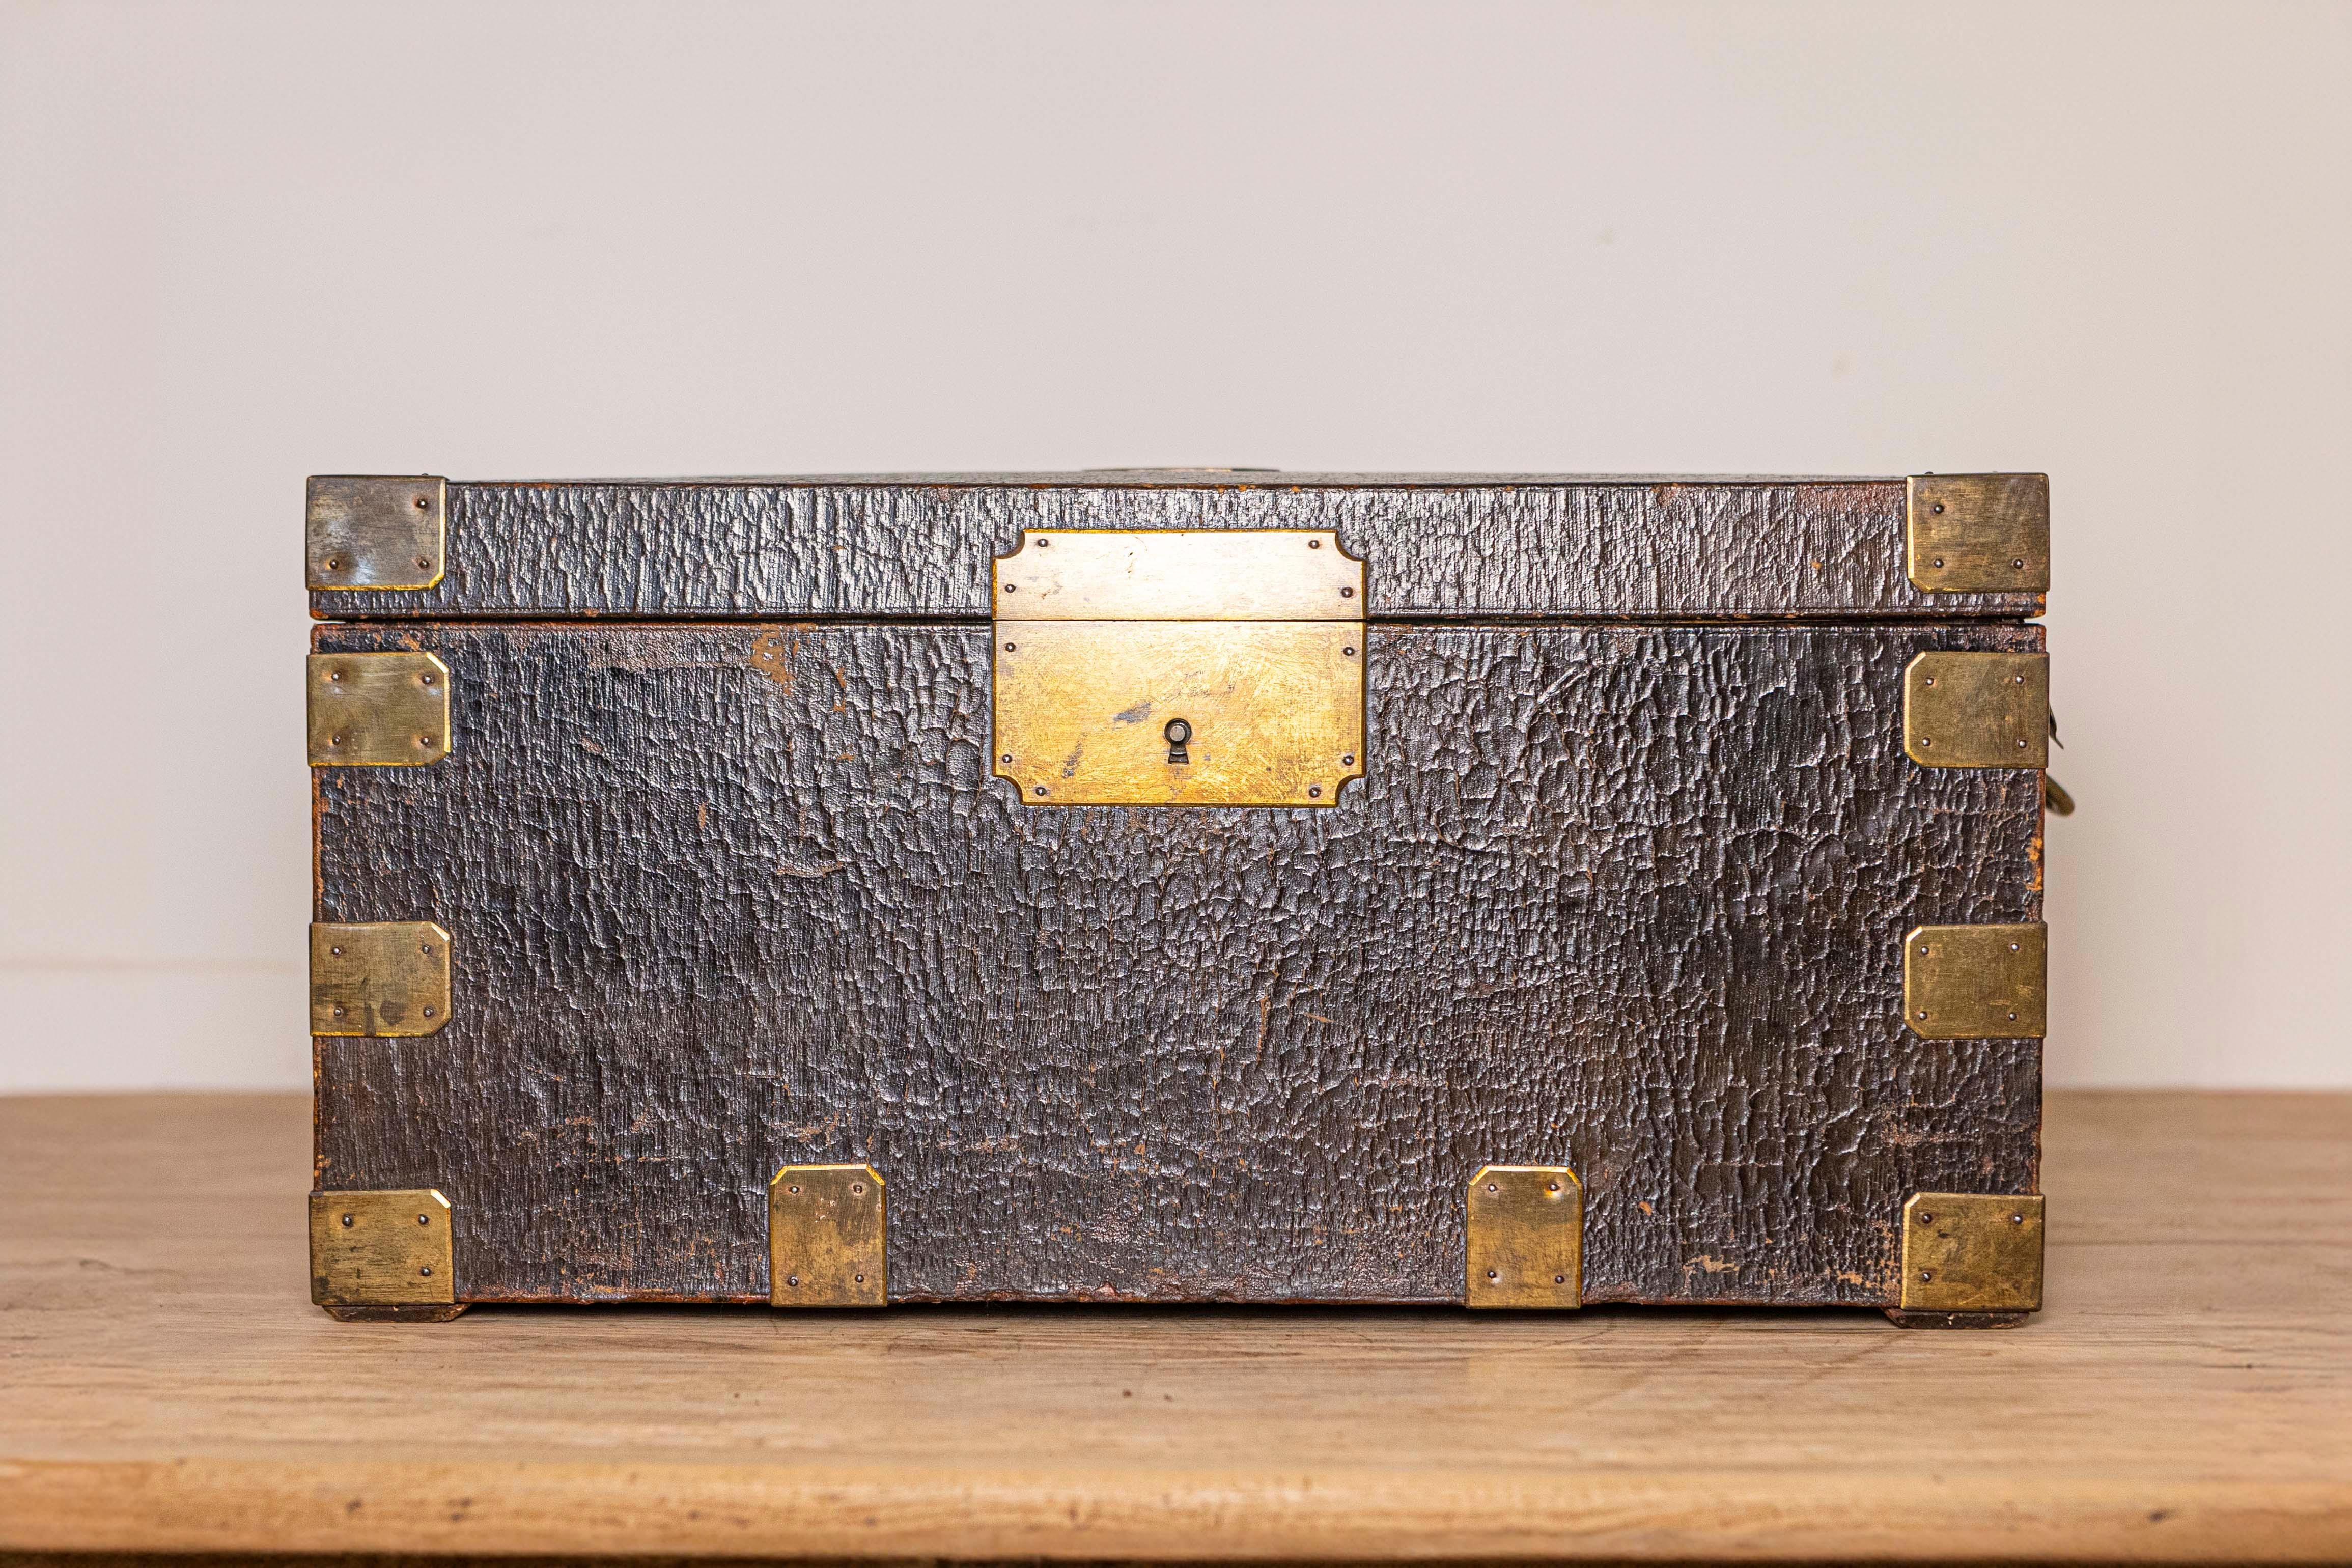 A French wooden decorative box from the 19th century from the Maison 'Gellée Gainier' à la Boule d'Or, Paris, leather bound with brass braces, presenting a compartmented interior and brass lateral handles. Created on the Île de la Cité close to the